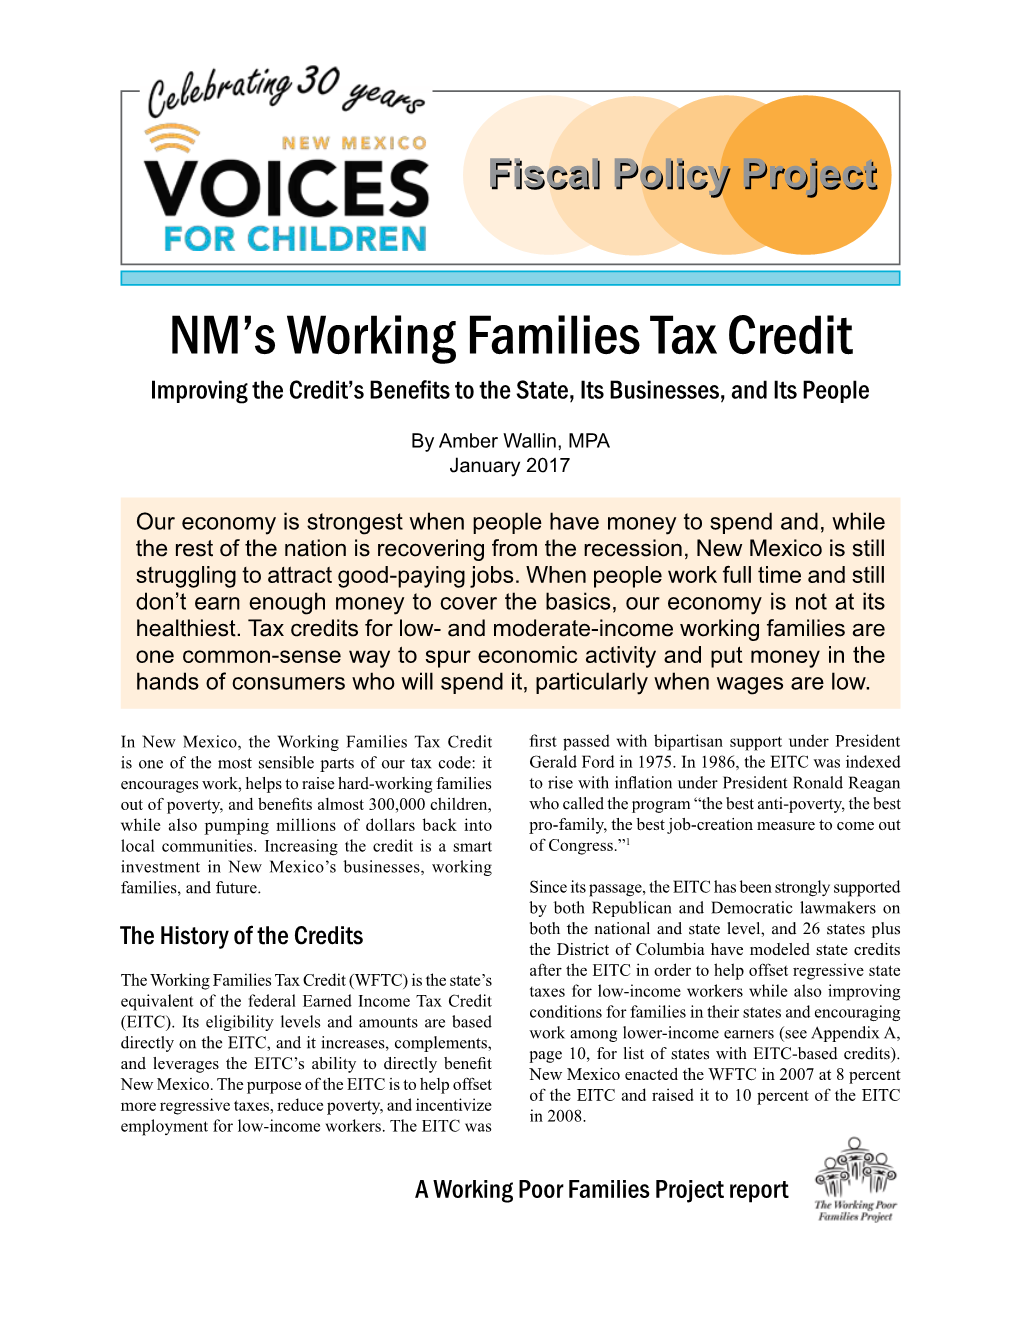 NM's Working Families Tax Credit